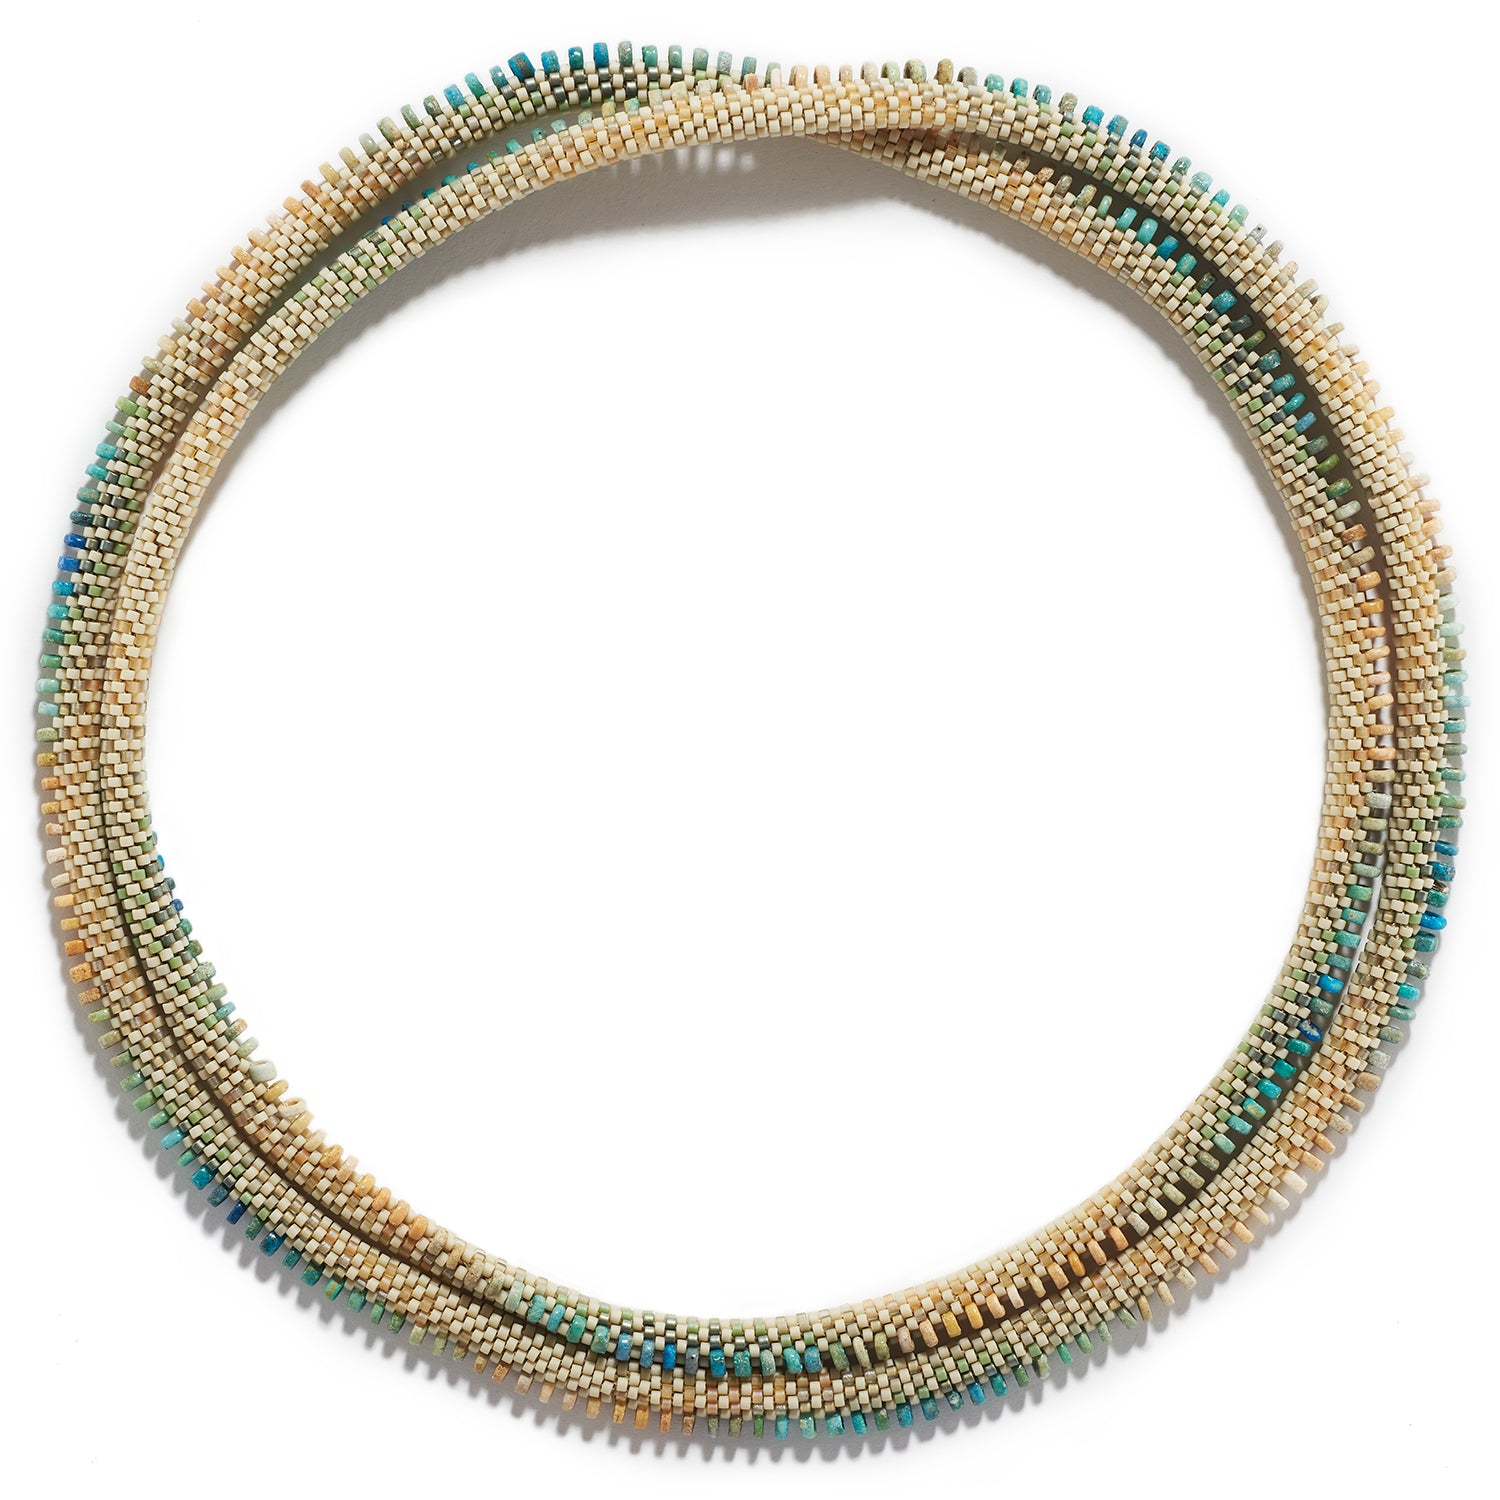 Faience II Necklace